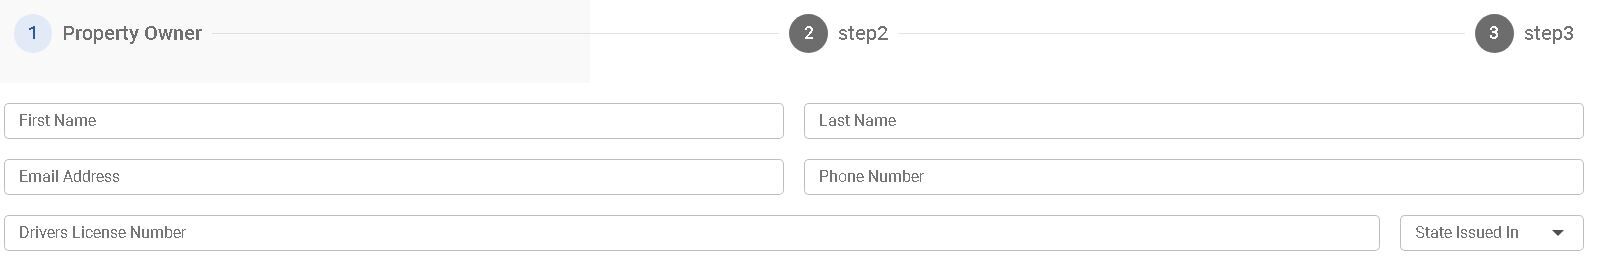 Input form before validation